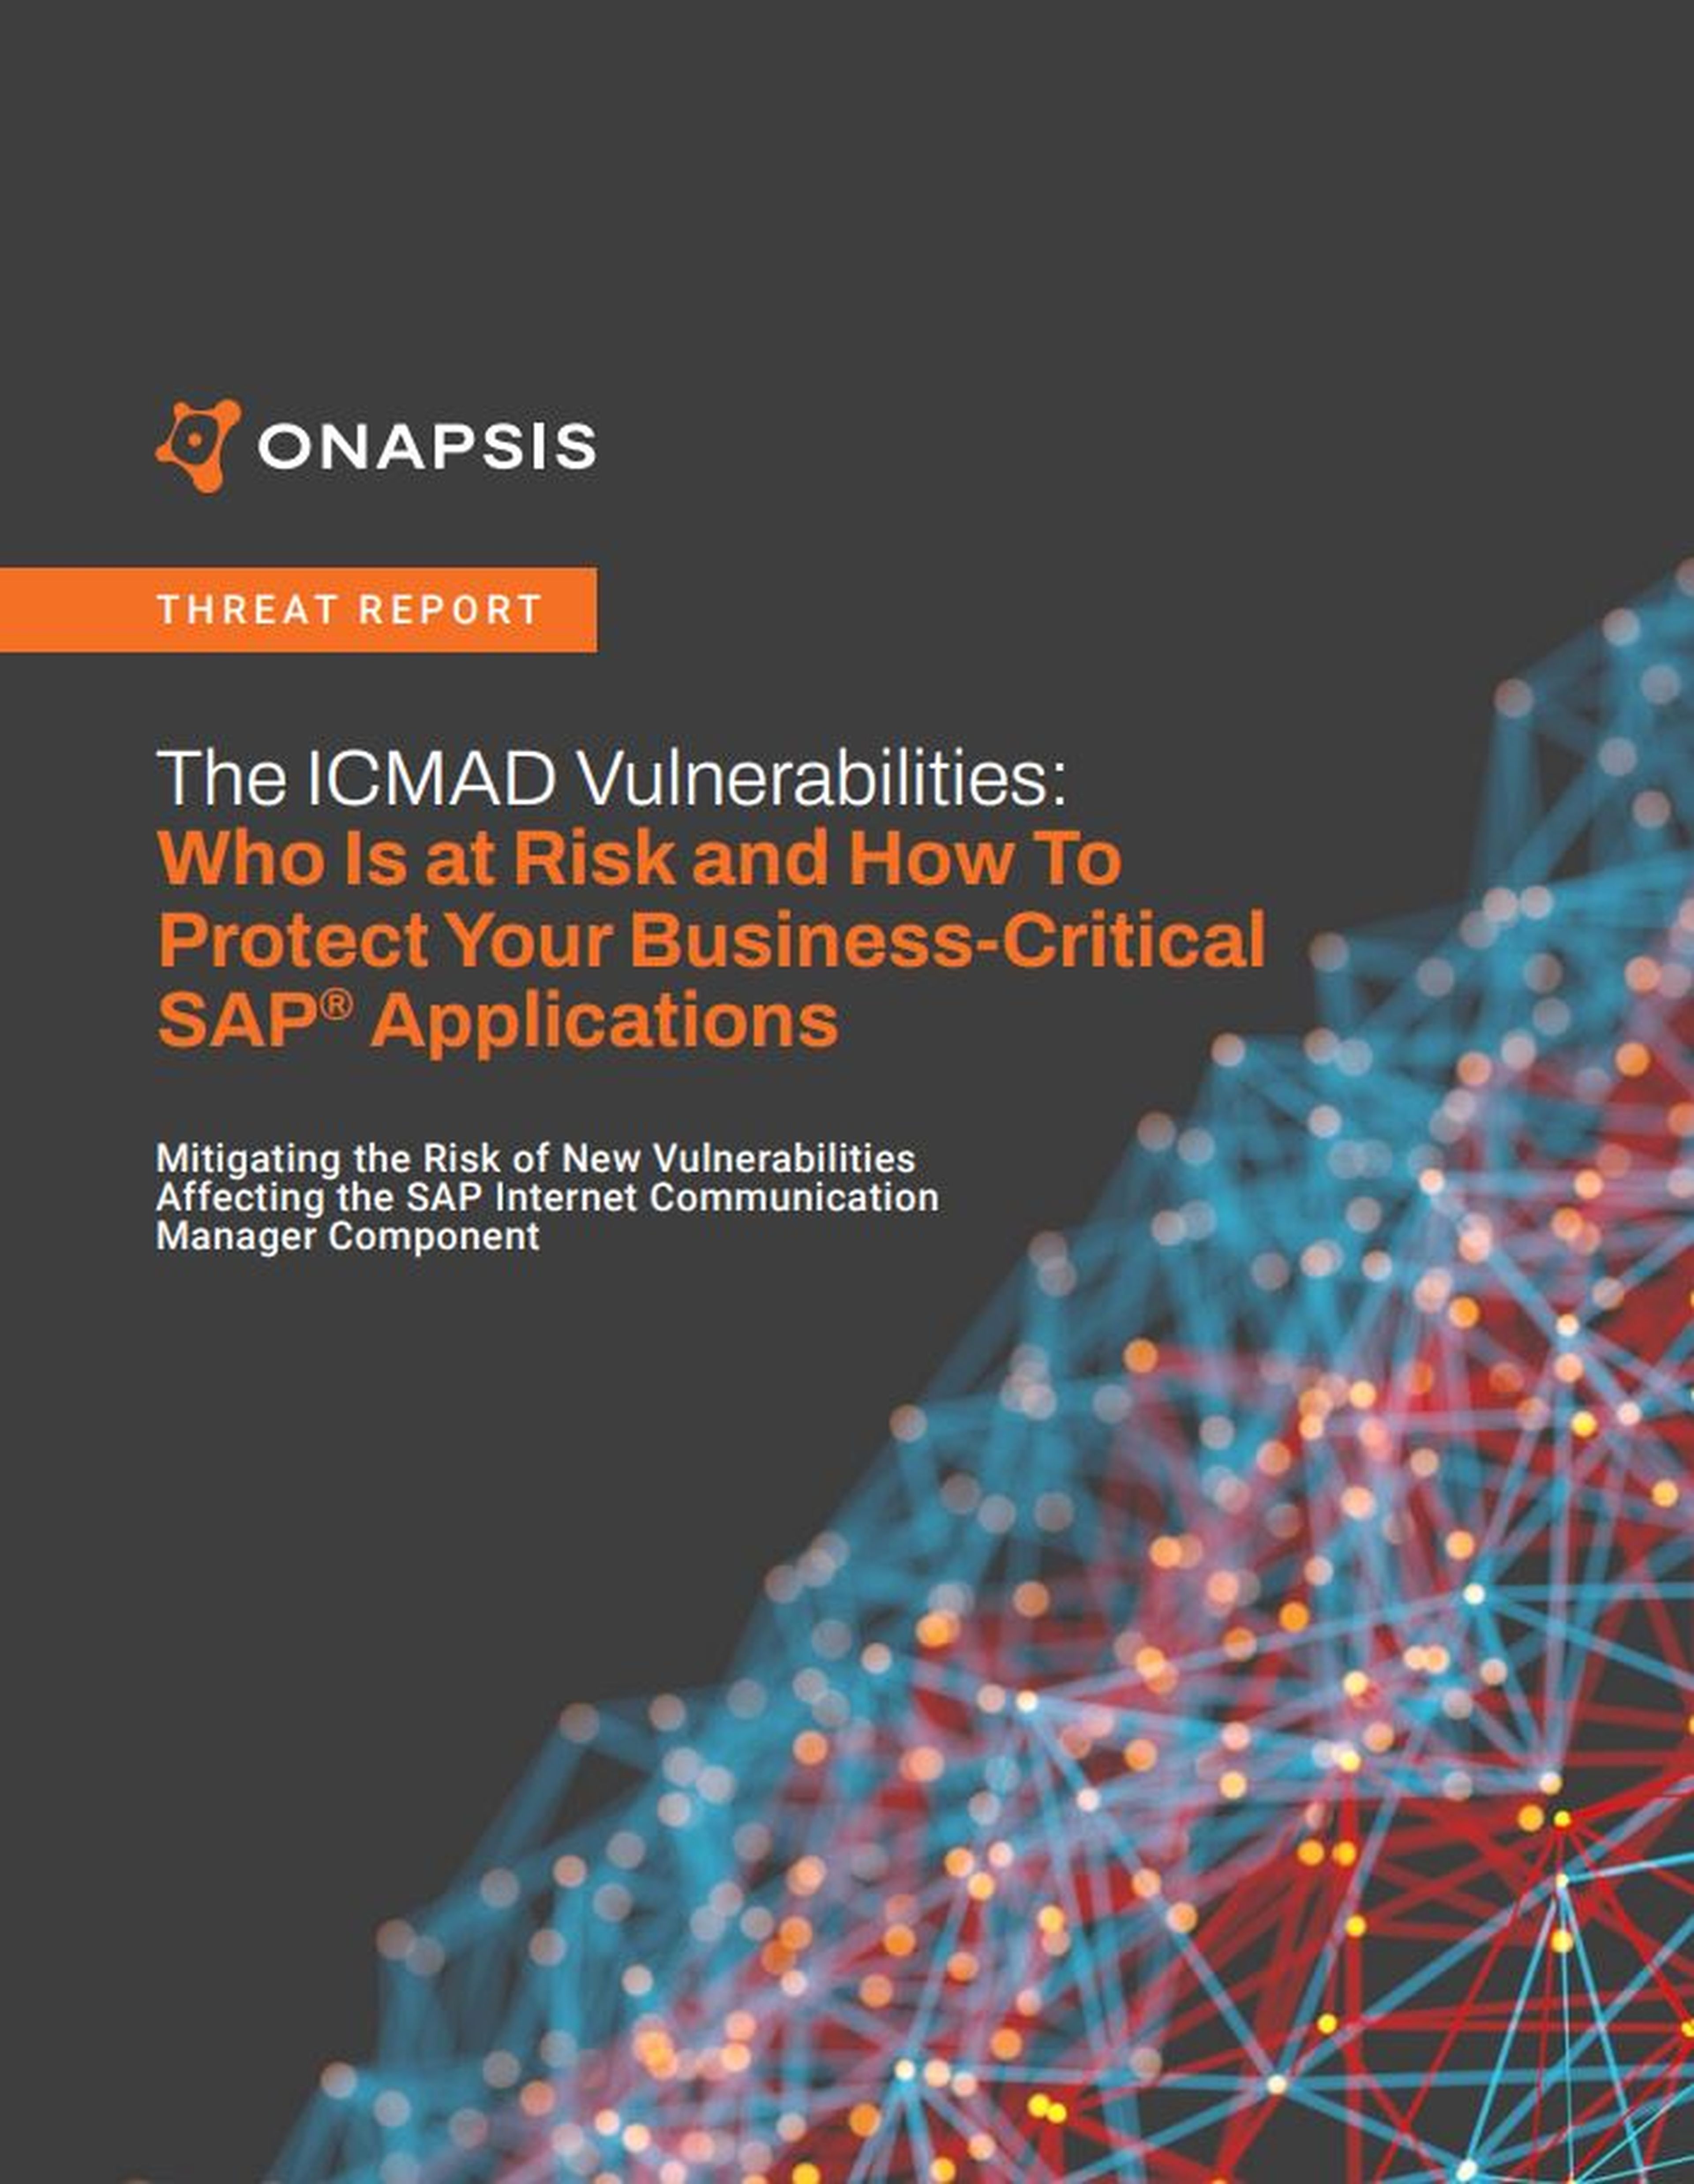 New critical vulnerabilities in SAP Internet Communication Manager require immediate attention